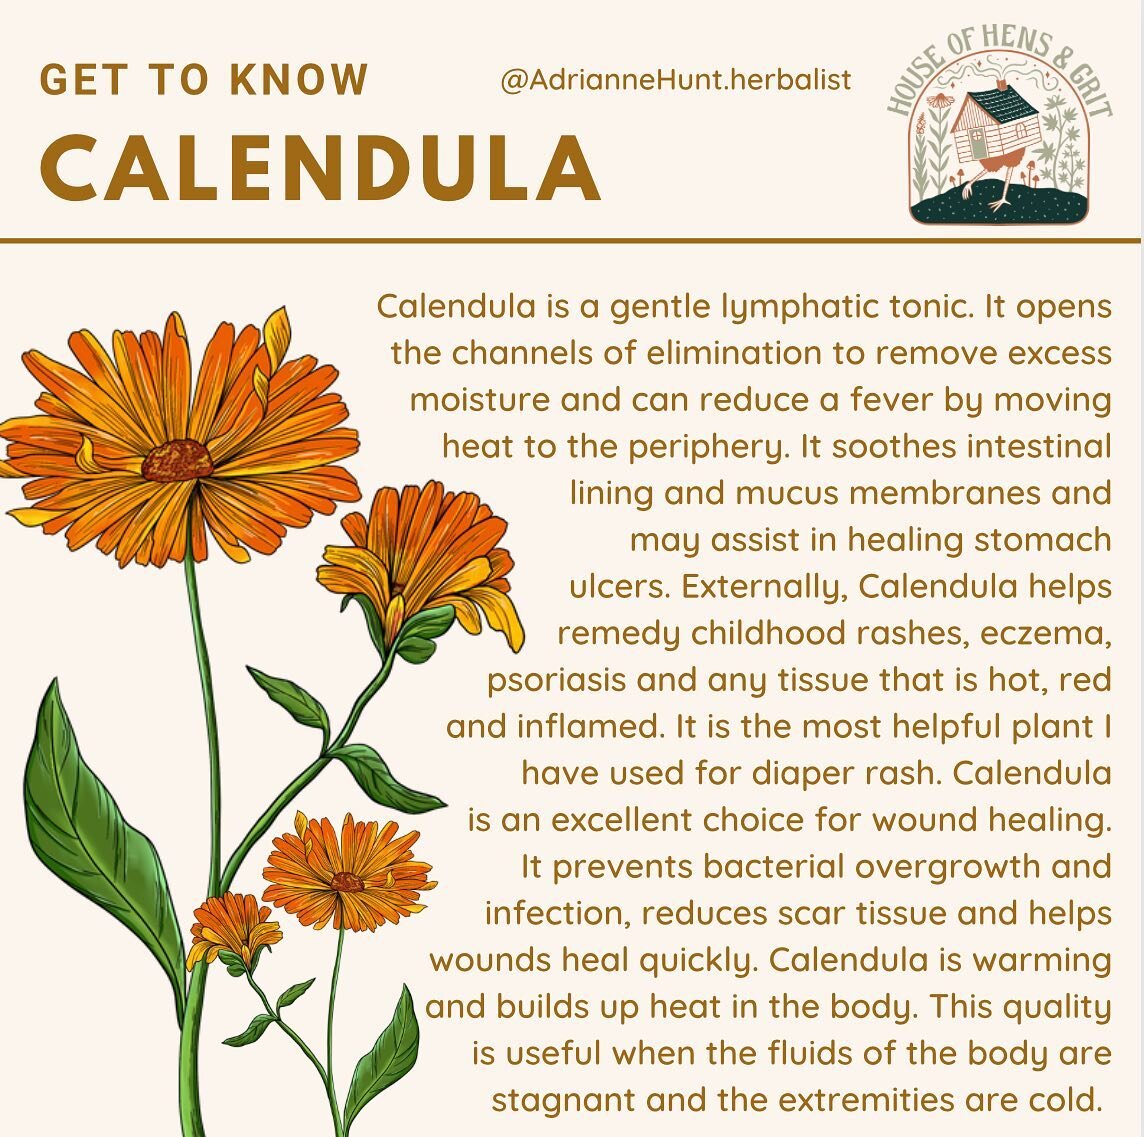 Calendula Officinalis / Calendula / Asteraceae
-
Calendula Extract speeds tissue healing from injuries, cuts, burns and bruises. Regular use soothes dry skin, eczema, psoriasis, hemorrhoids, and postnatal healing.&nbsp;
-
Parts Used: Flowers
-
Uses:
